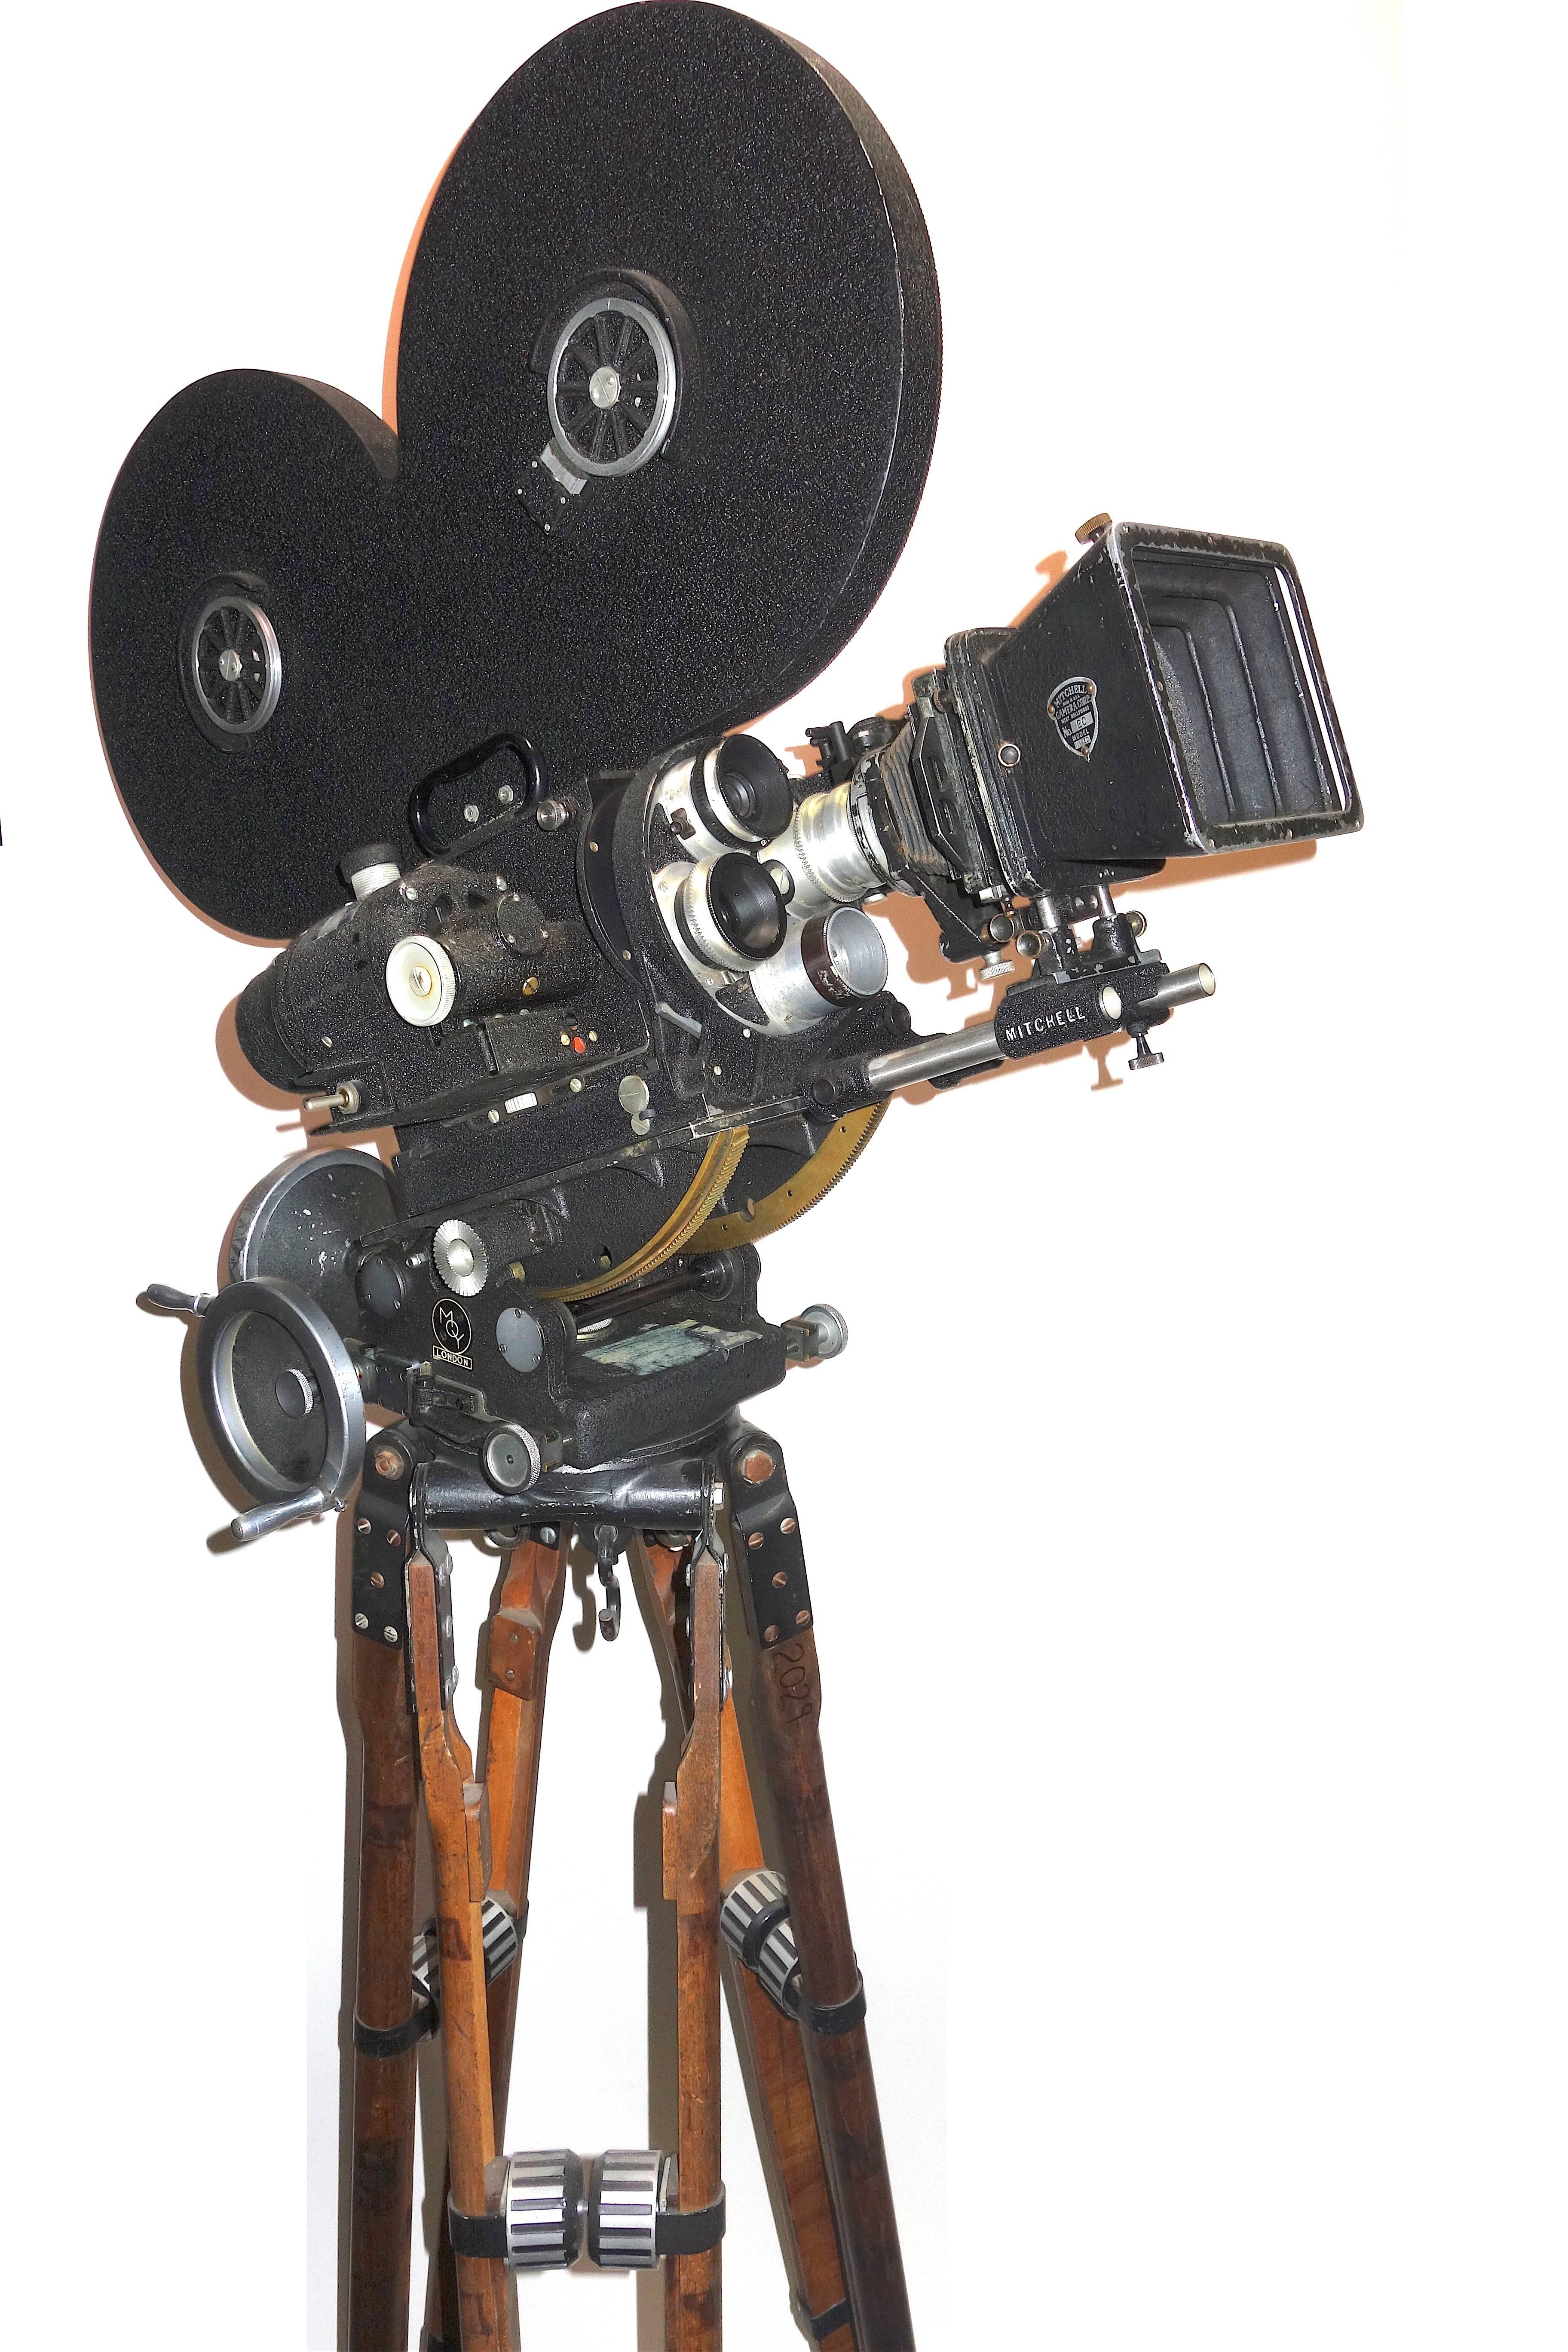 Offered for your approval is this midcentury USA Made complete Mitchell Motion Picture Camera displayed on a British Made MOY Mini Geared Head and American Wood Tripod Legs.

This is an outstanding example of a 16mm professional Mitchell camera with